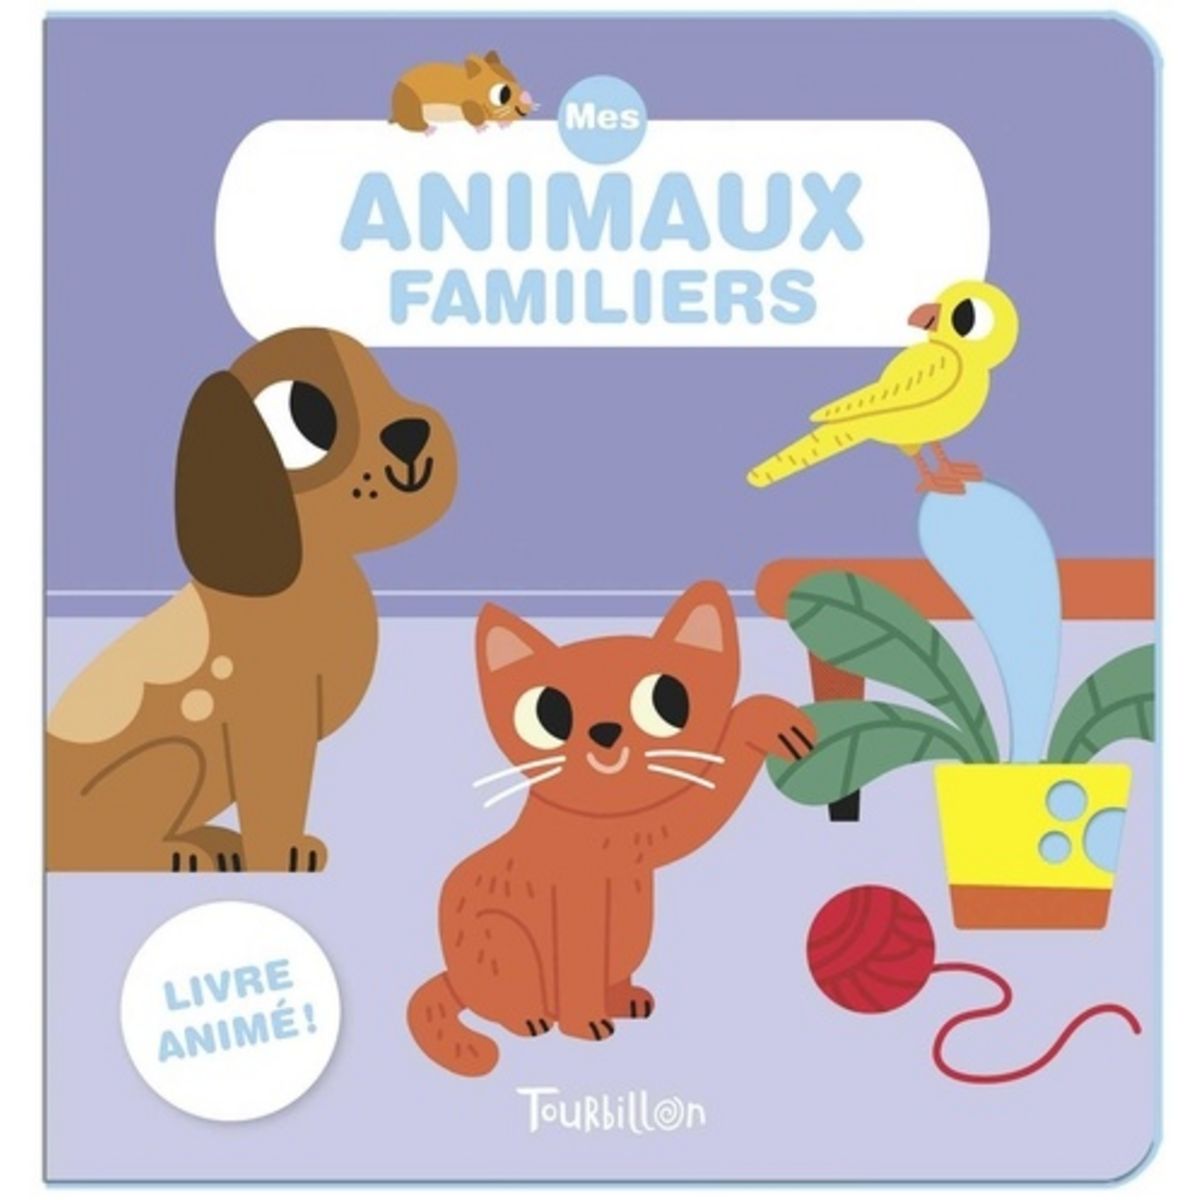  MES ANIMAUX FAMILIERS, Billet Marion